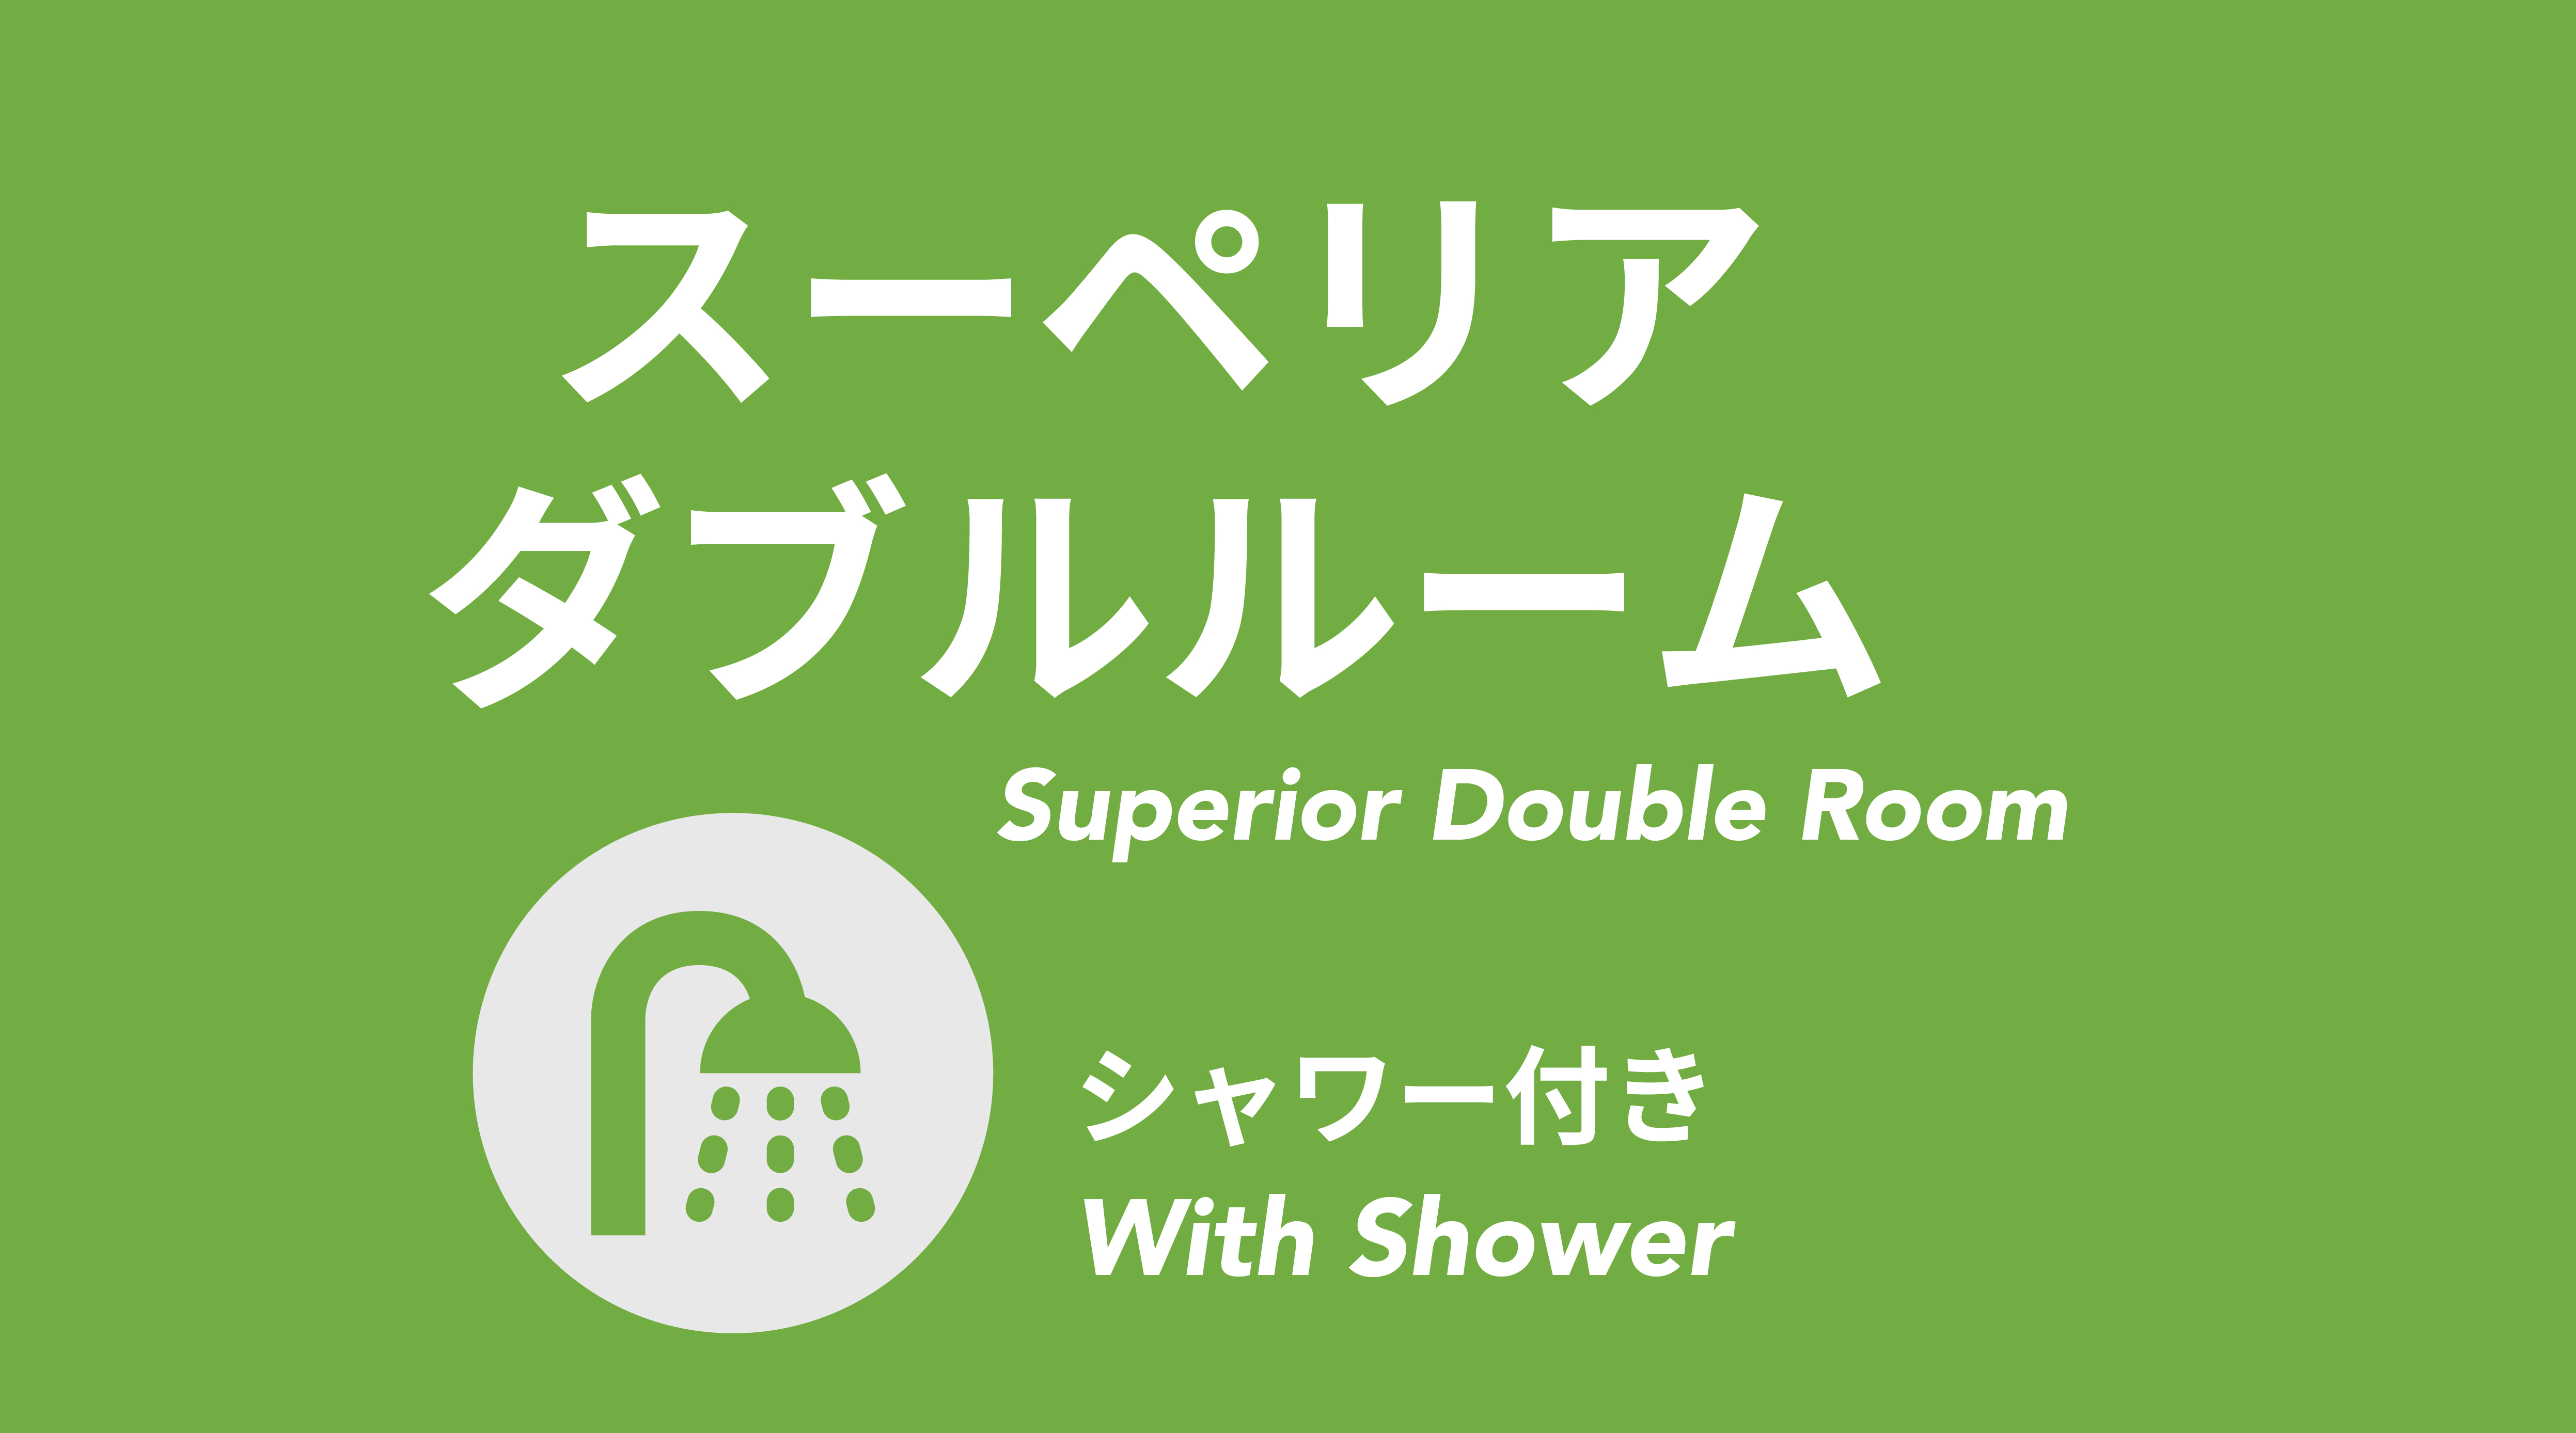 Superior Double Room with Shower